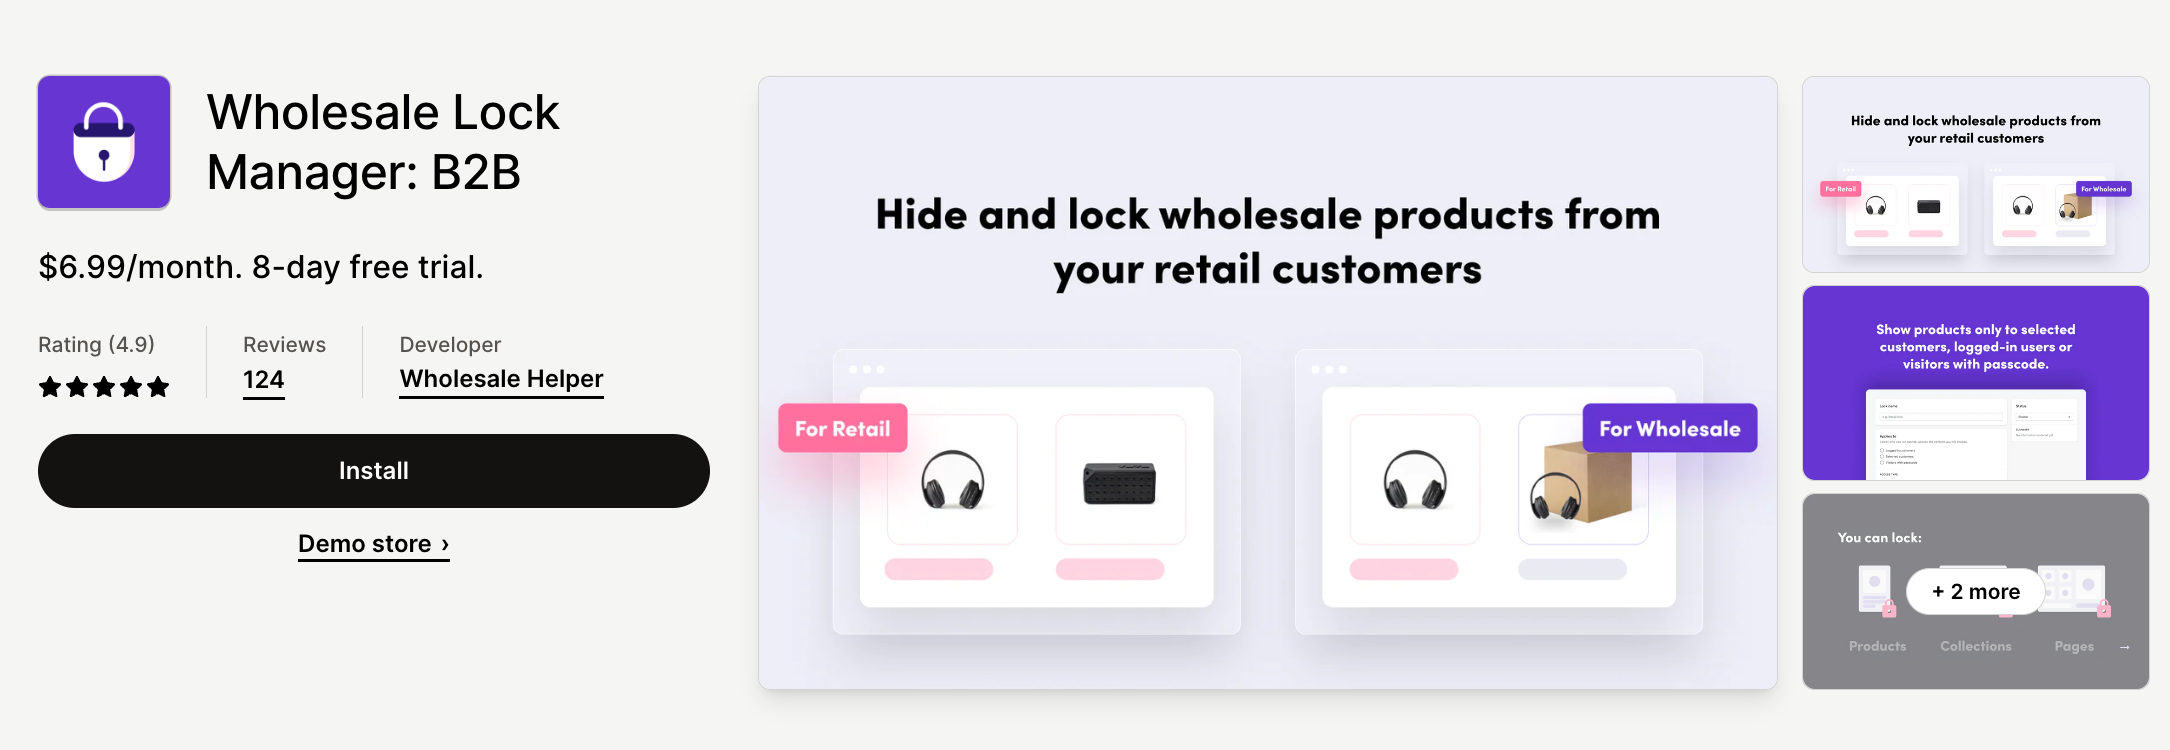 https://apps.shopify.com/wholesale-lock-manager